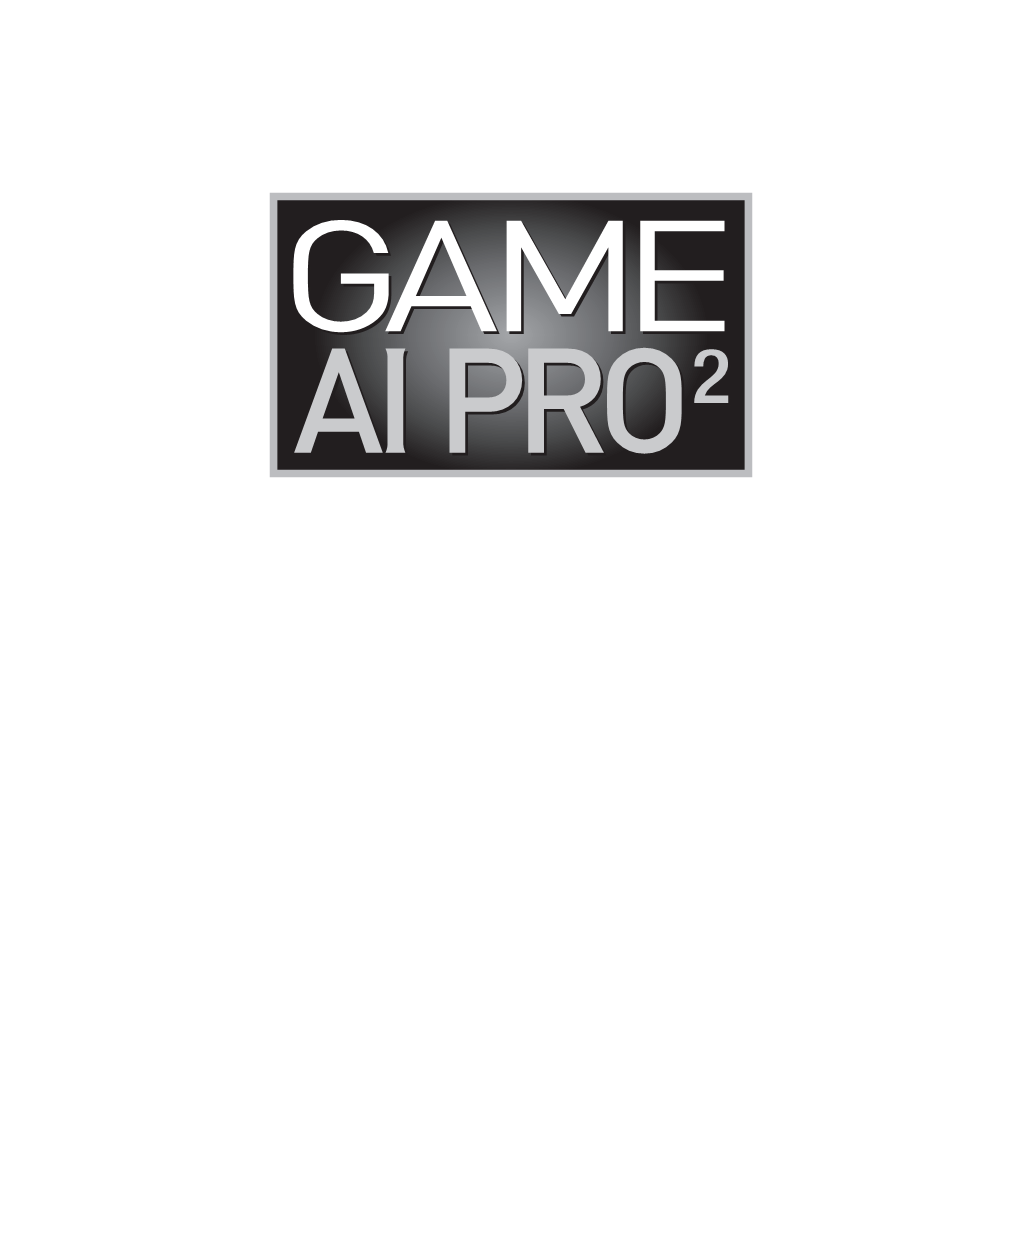 Game AI Pro 2 : Collected Wisdom of Game AI Professionals, Ed